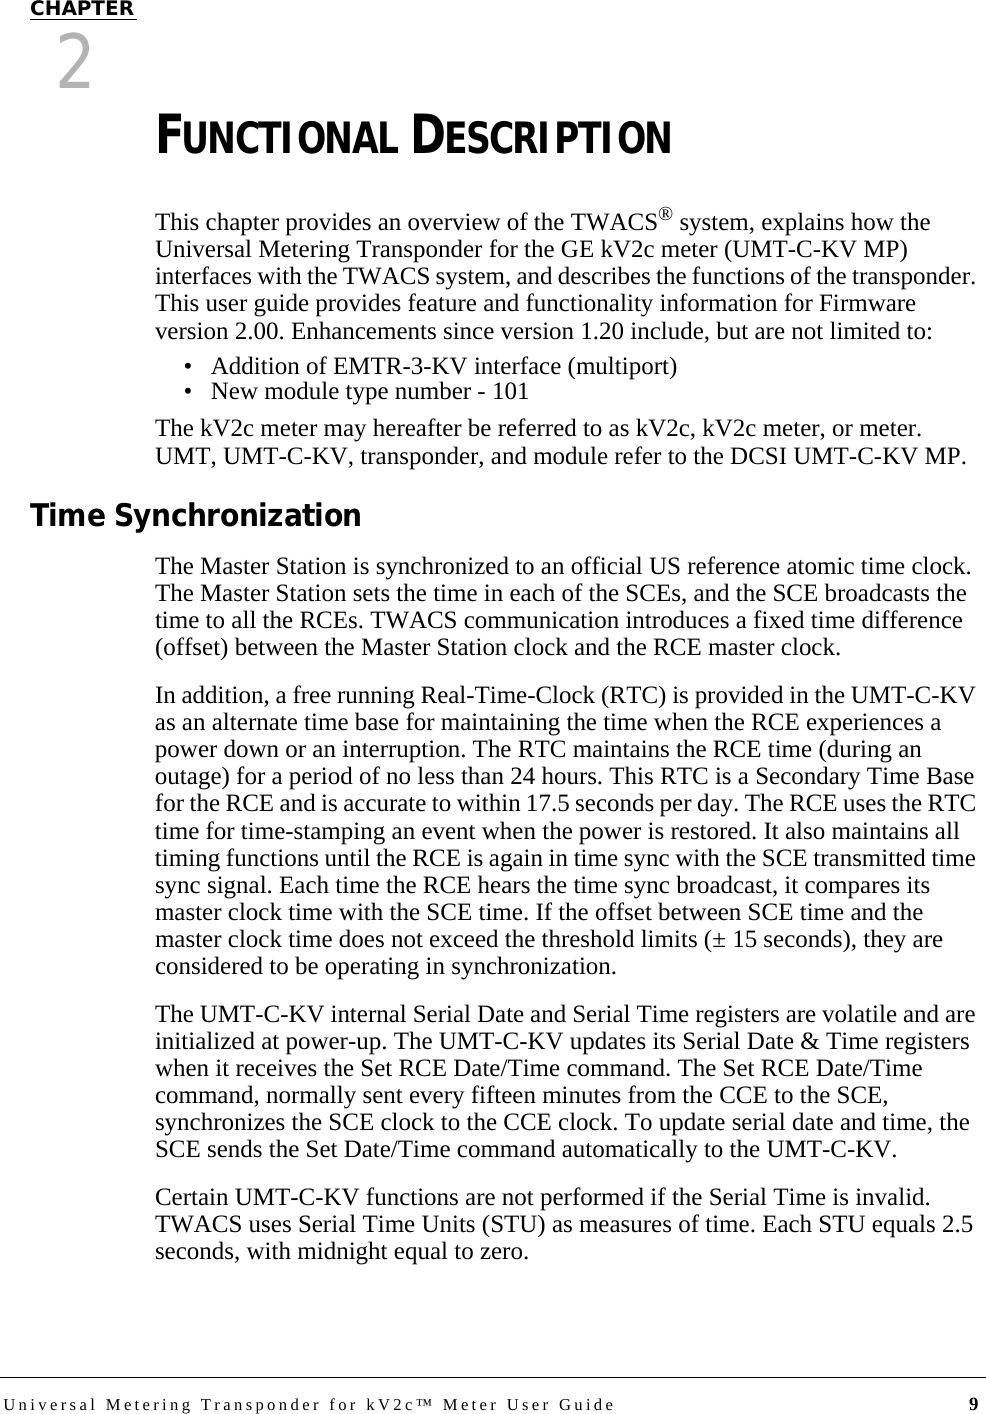 Universal Metering Transponder for kV2c™ Meter User Guide 9CHAPTER2FUNCTIONAL DESCRIPTIONThis chapter provides an overview of the TWACS® system, explains how the Universal Metering Transponder for the GE kV2c meter (UMT-C-KV MP) interfaces with the TWACS system, and describes the functions of the transponder. This user guide provides feature and functionality information for Firmware version 2.00. Enhancements since version 1.20 include, but are not limited to:• Addition of EMTR-3-KV interface (multiport)• New module type number - 101The kV2c meter may hereafter be referred to as kV2c, kV2c meter, or meter. UMT, UMT-C-KV, transponder, and module refer to the DCSI UMT-C-KV MP.Time SynchronizationThe Master Station is synchronized to an official US reference atomic time clock. The Master Station sets the time in each of the SCEs, and the SCE broadcasts the time to all the RCEs. TWACS communication introduces a fixed time difference (offset) between the Master Station clock and the RCE master clock. In addition, a free running Real-Time-Clock (RTC) is provided in the UMT-C-KV as an alternate time base for maintaining the time when the RCE experiences a power down or an interruption. The RTC maintains the RCE time (during an outage) for a period of no less than 24 hours. This RTC is a Secondary Time Base for the RCE and is accurate to within 17.5 seconds per day. The RCE uses the RTC time for time-stamping an event when the power is restored. It also maintains all timing functions until the RCE is again in time sync with the SCE transmitted time sync signal. Each time the RCE hears the time sync broadcast, it compares its master clock time with the SCE time. If the offset between SCE time and the master clock time does not exceed the threshold limits (± 15 seconds), they are considered to be operating in synchronization.The UMT-C-KV internal Serial Date and Serial Time registers are volatile and are initialized at power-up. The UMT-C-KV updates its Serial Date &amp; Time registers when it receives the Set RCE Date/Time command. The Set RCE Date/Time command, normally sent every fifteen minutes from the CCE to the SCE, synchronizes the SCE clock to the CCE clock. To update serial date and time, the SCE sends the Set Date/Time command automatically to the UMT-C-KV. Certain UMT-C-KV functions are not performed if the Serial Time is invalid. TWACS uses Serial Time Units (STU) as measures of time. Each STU equals 2.5 seconds, with midnight equal to zero.